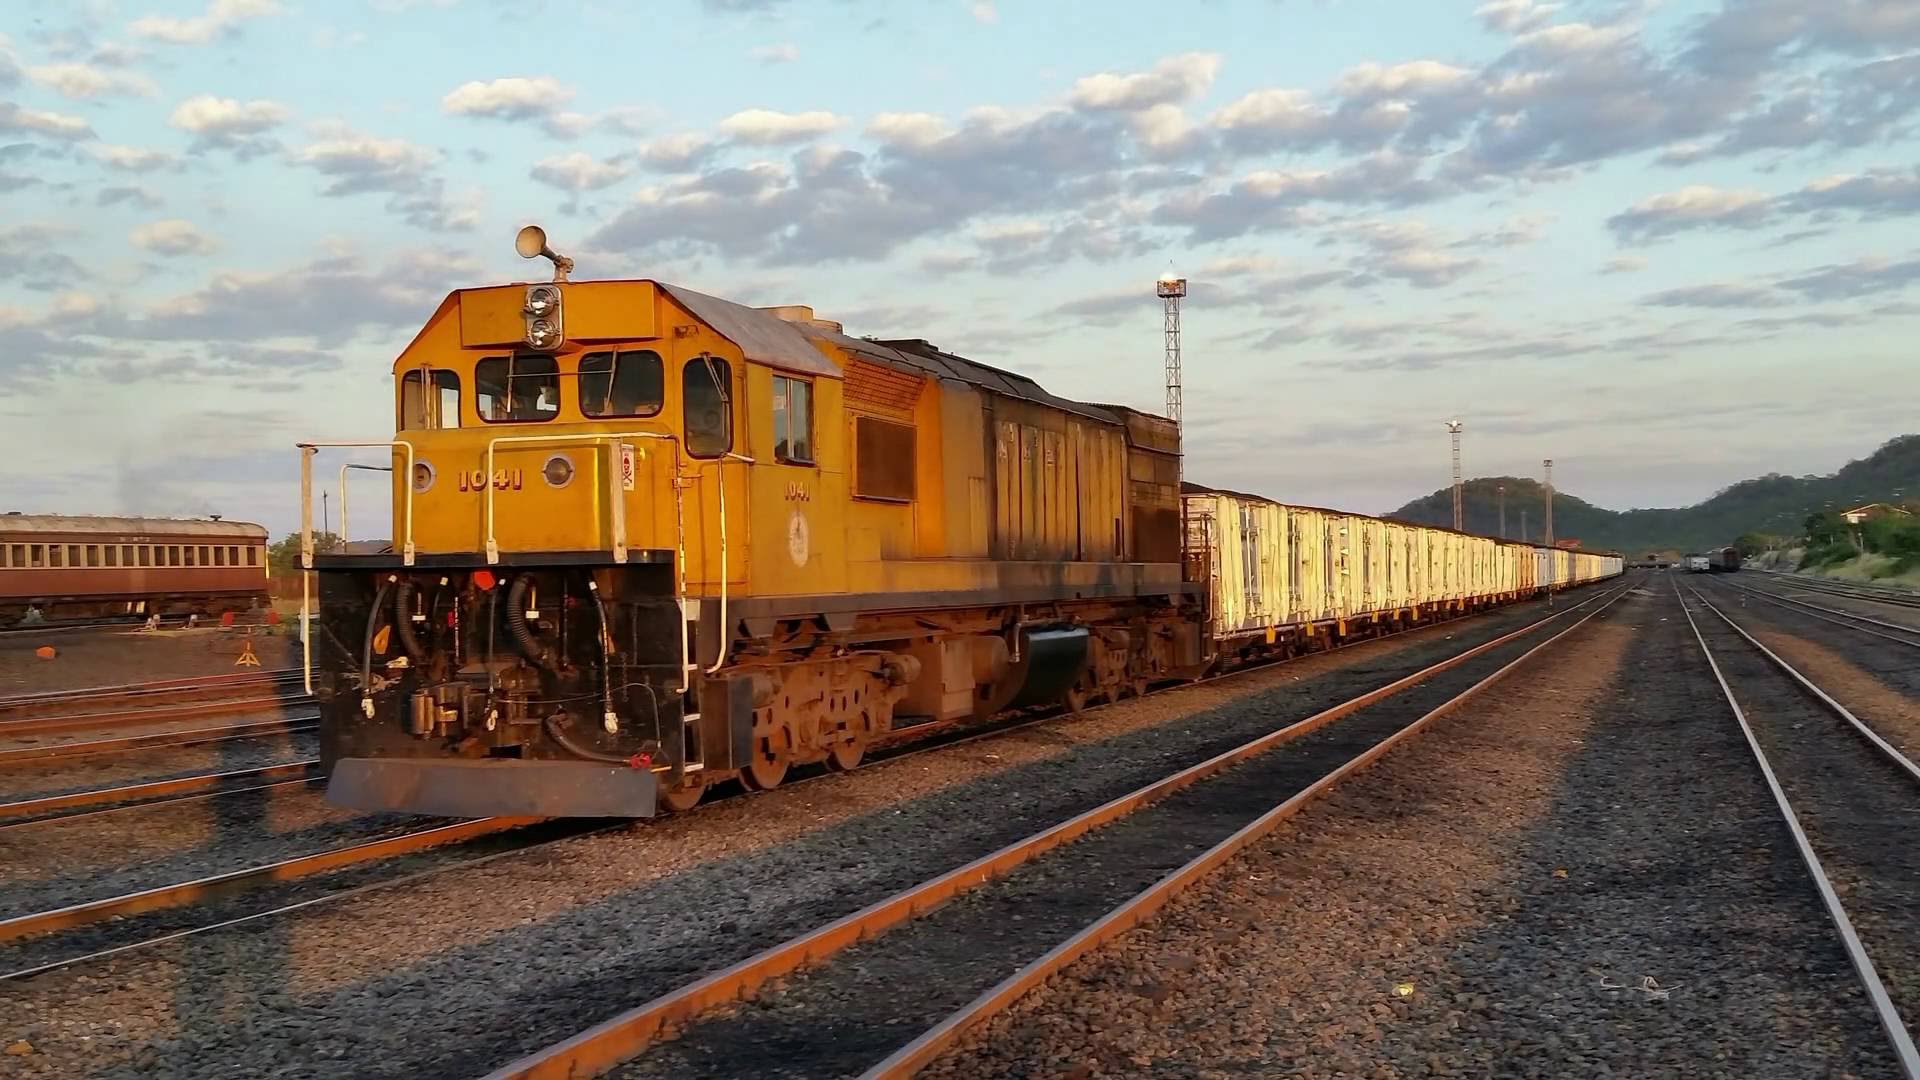 NRZ pushing miners out of business